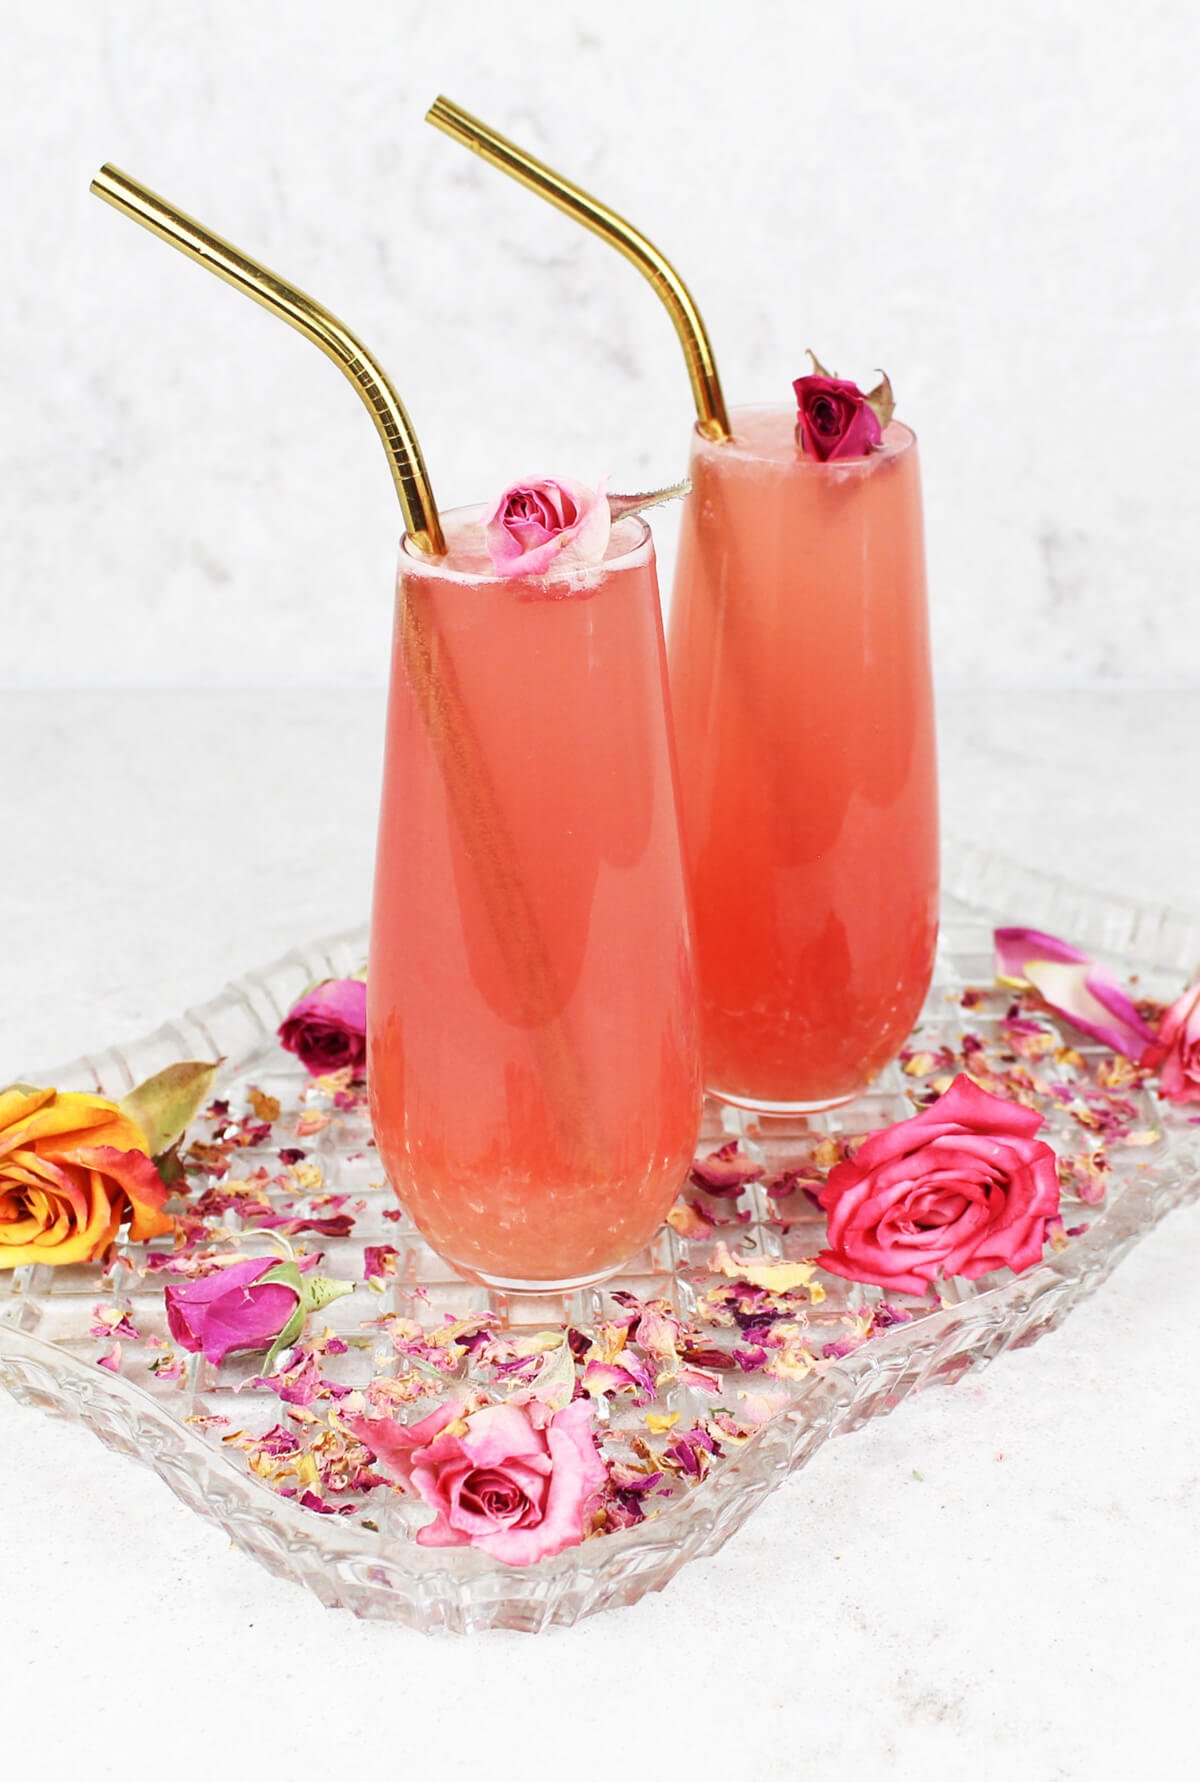 2 tall glasses of pink rose lemonade on a glass tray sprinkled with rose petals and gold straws.